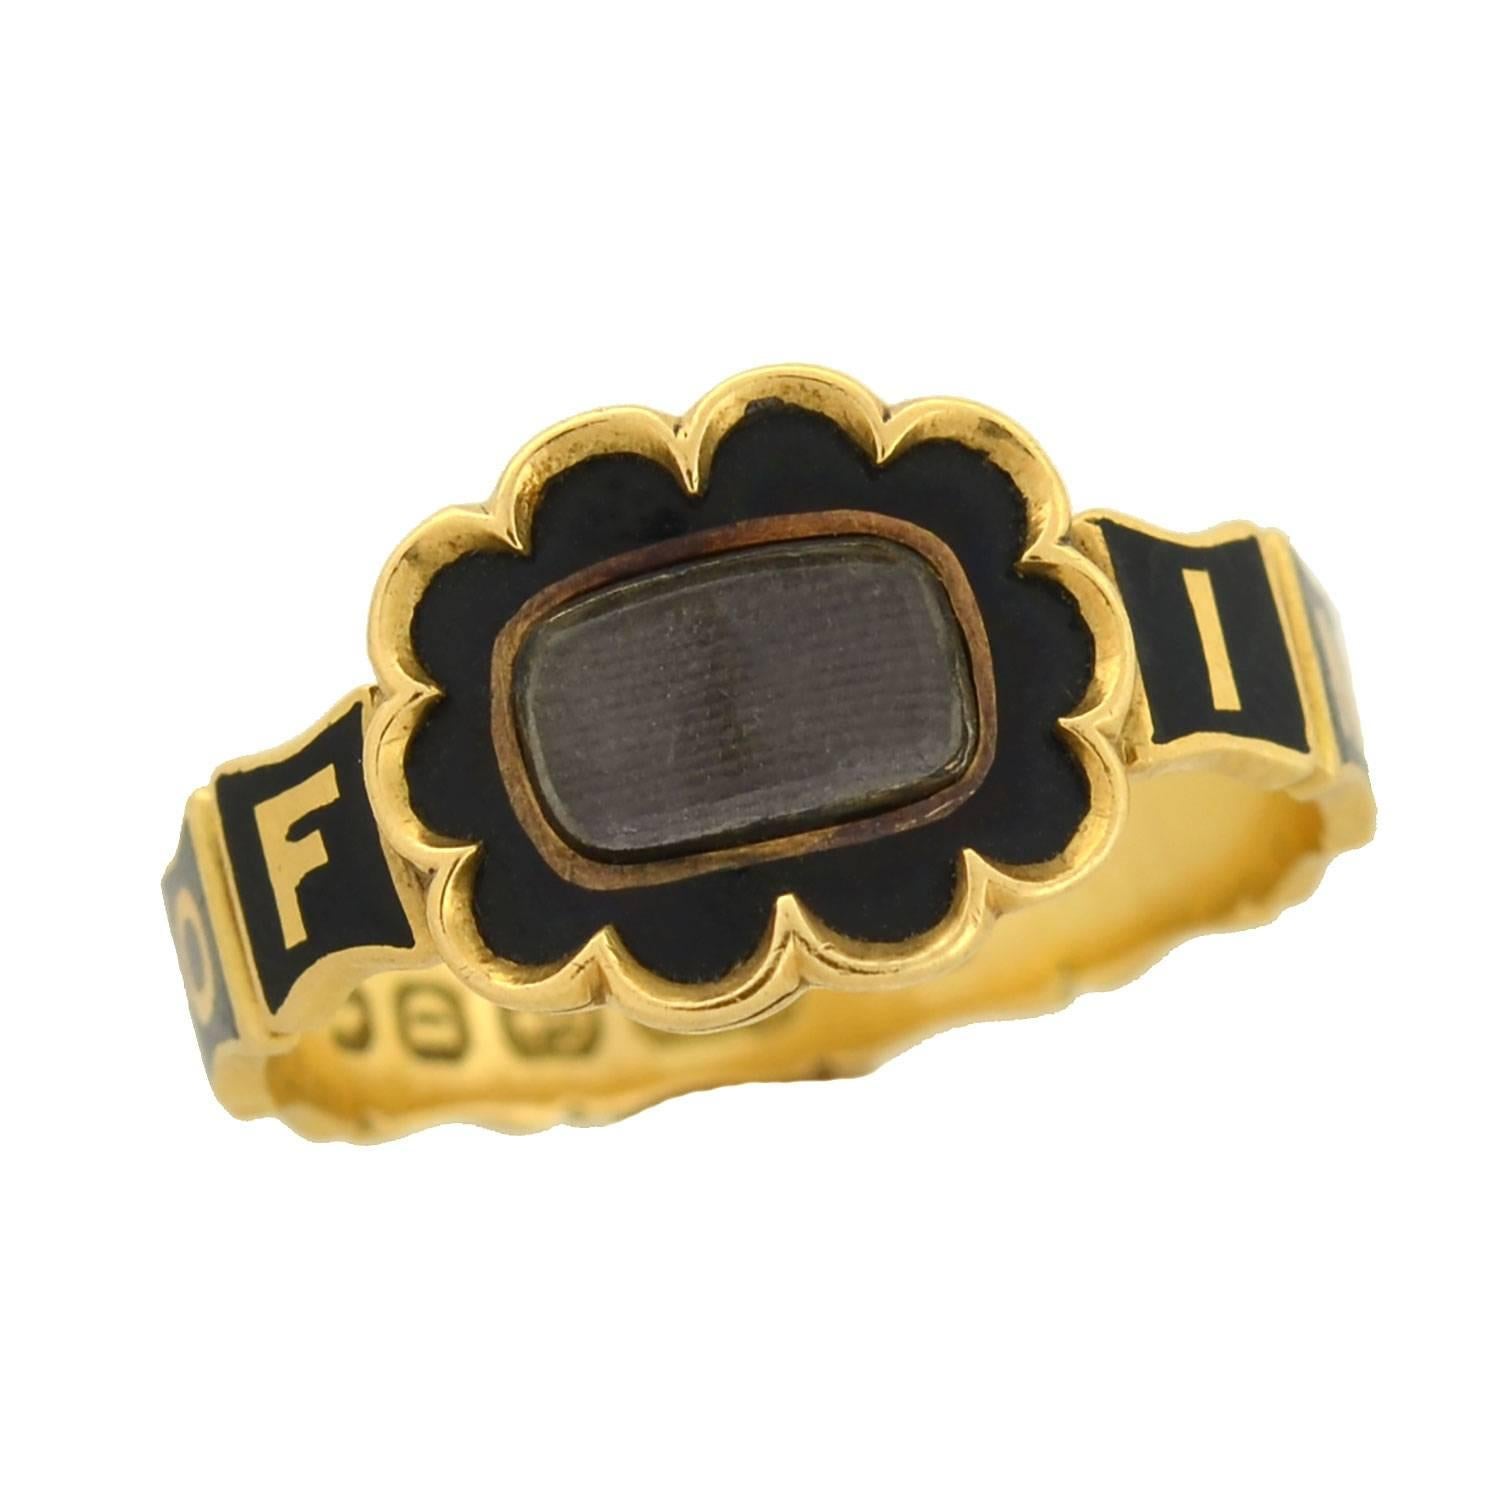 Early Victorian English Mourning Ring with Enameling and Woven Hair For Sale 1